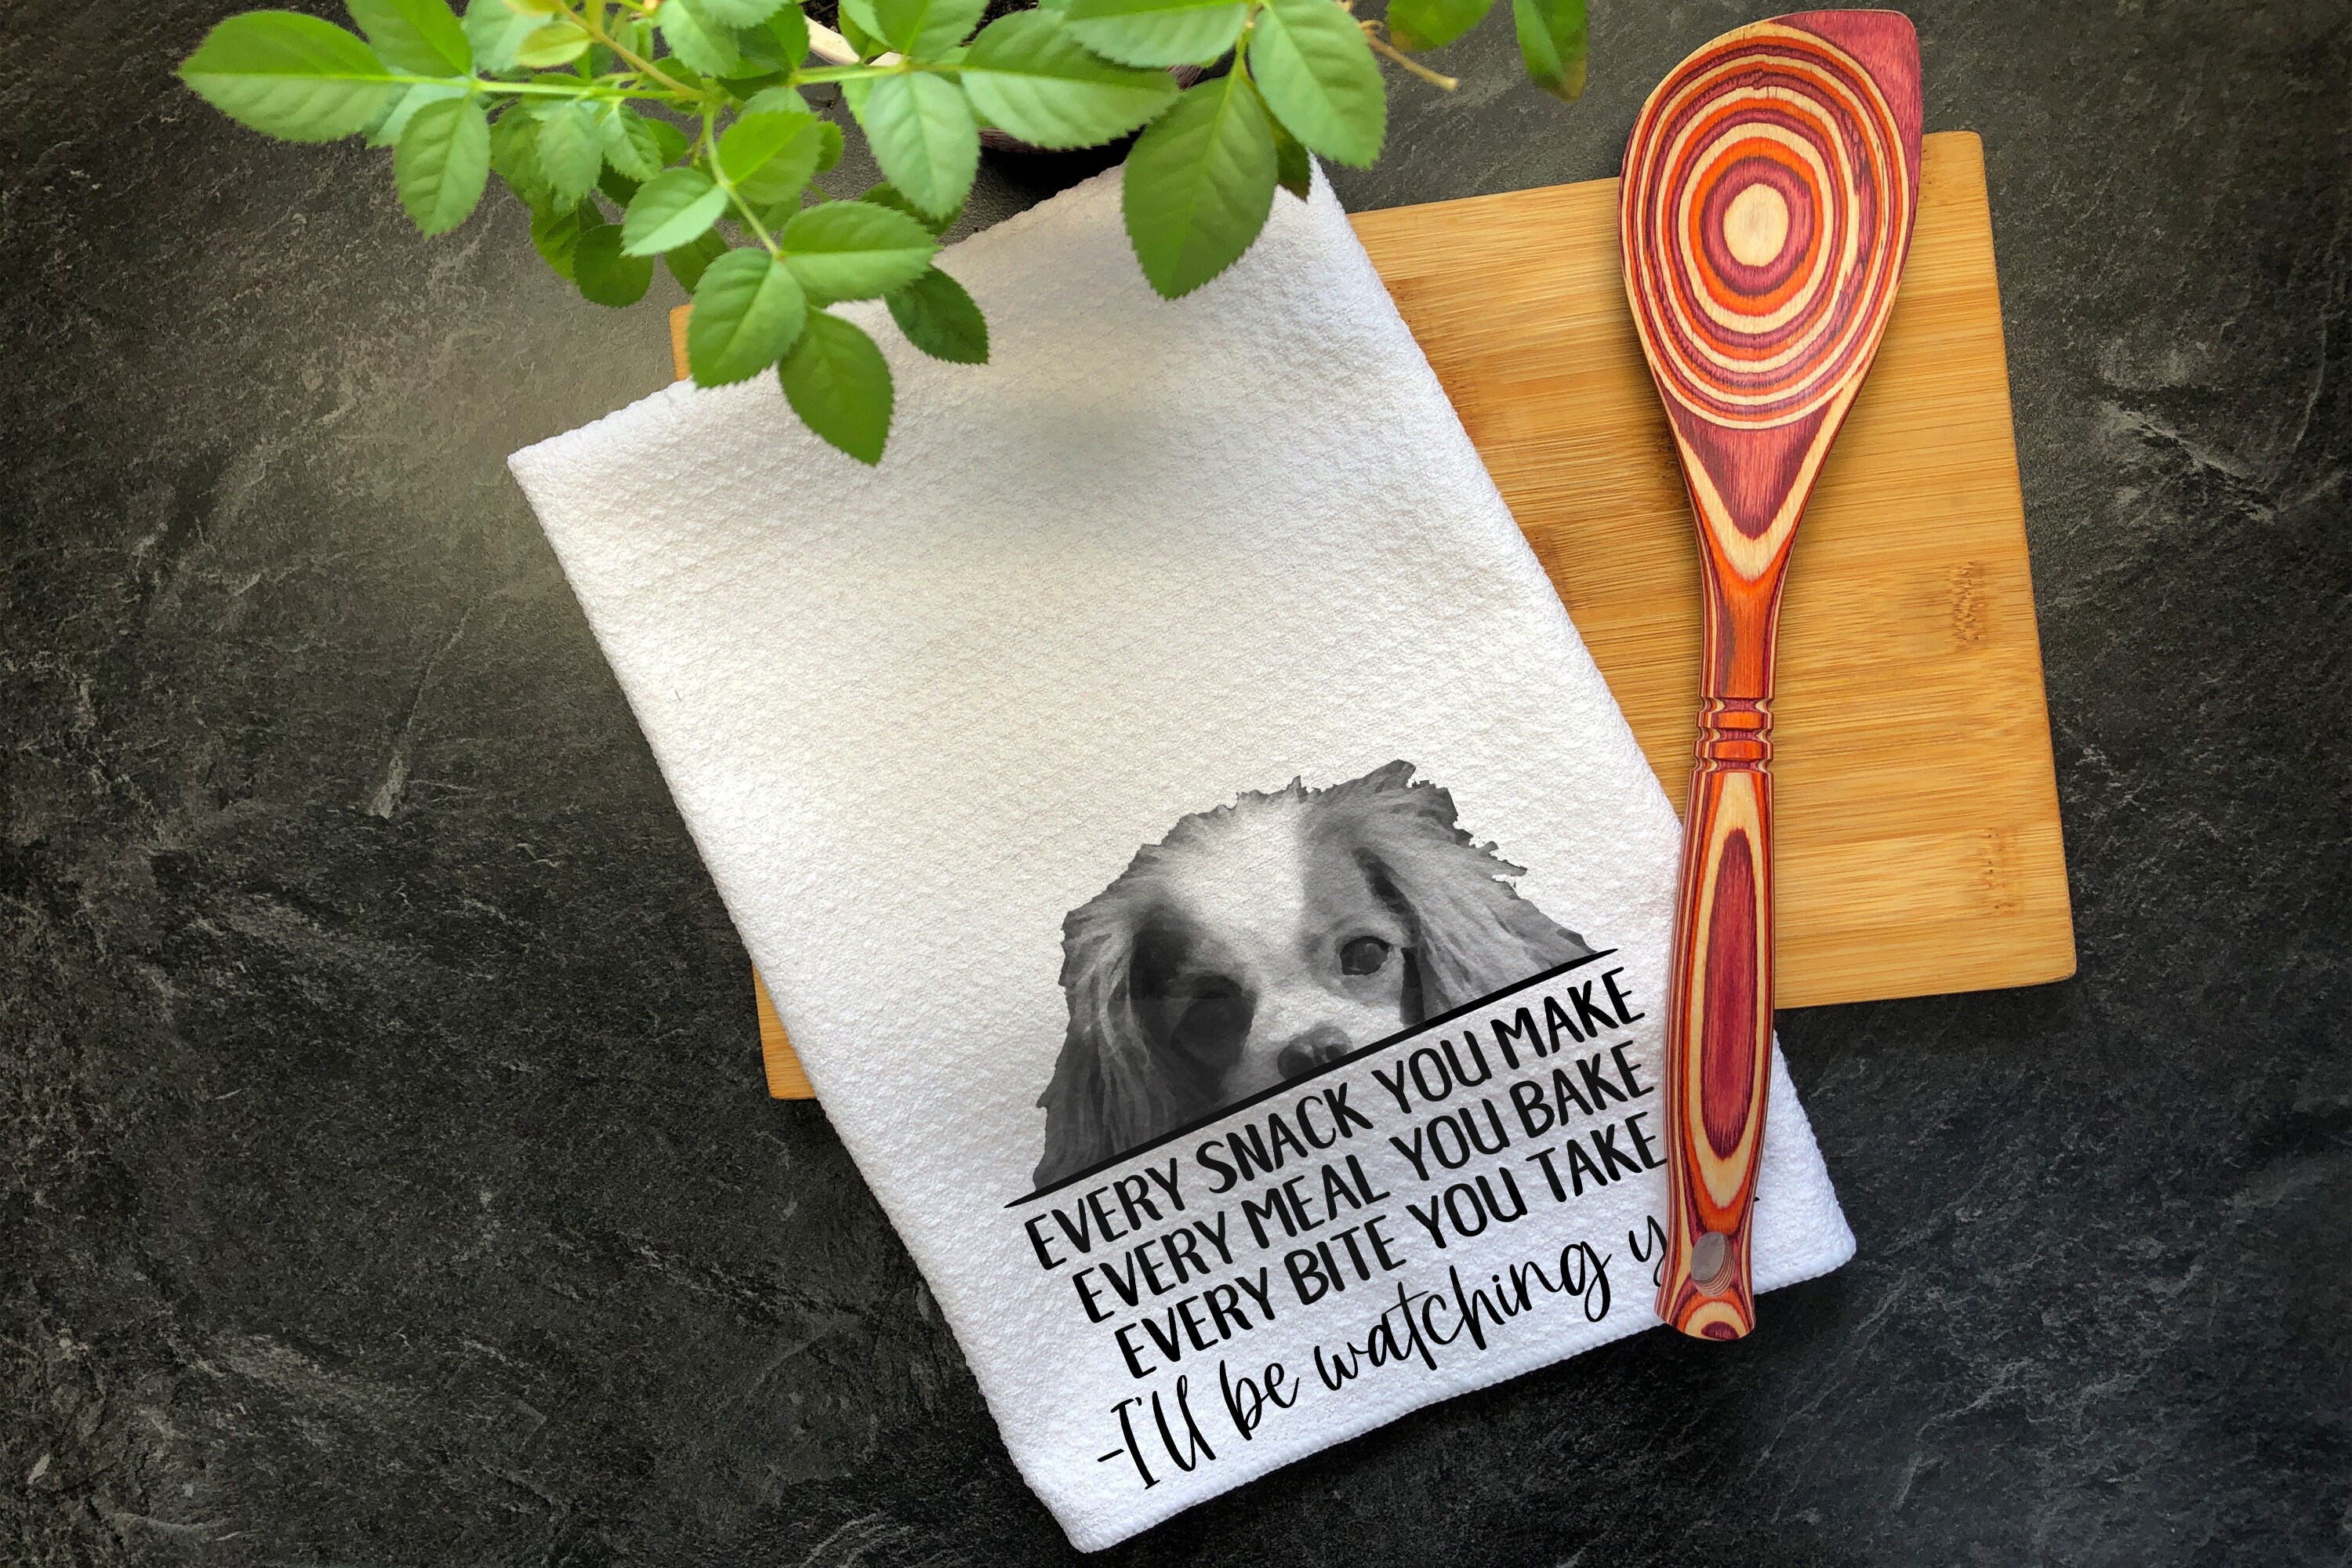  Funny Kitchen Towels ~ You Cook, I'll Clean Waffle kitchen Towel  : Handmade Products